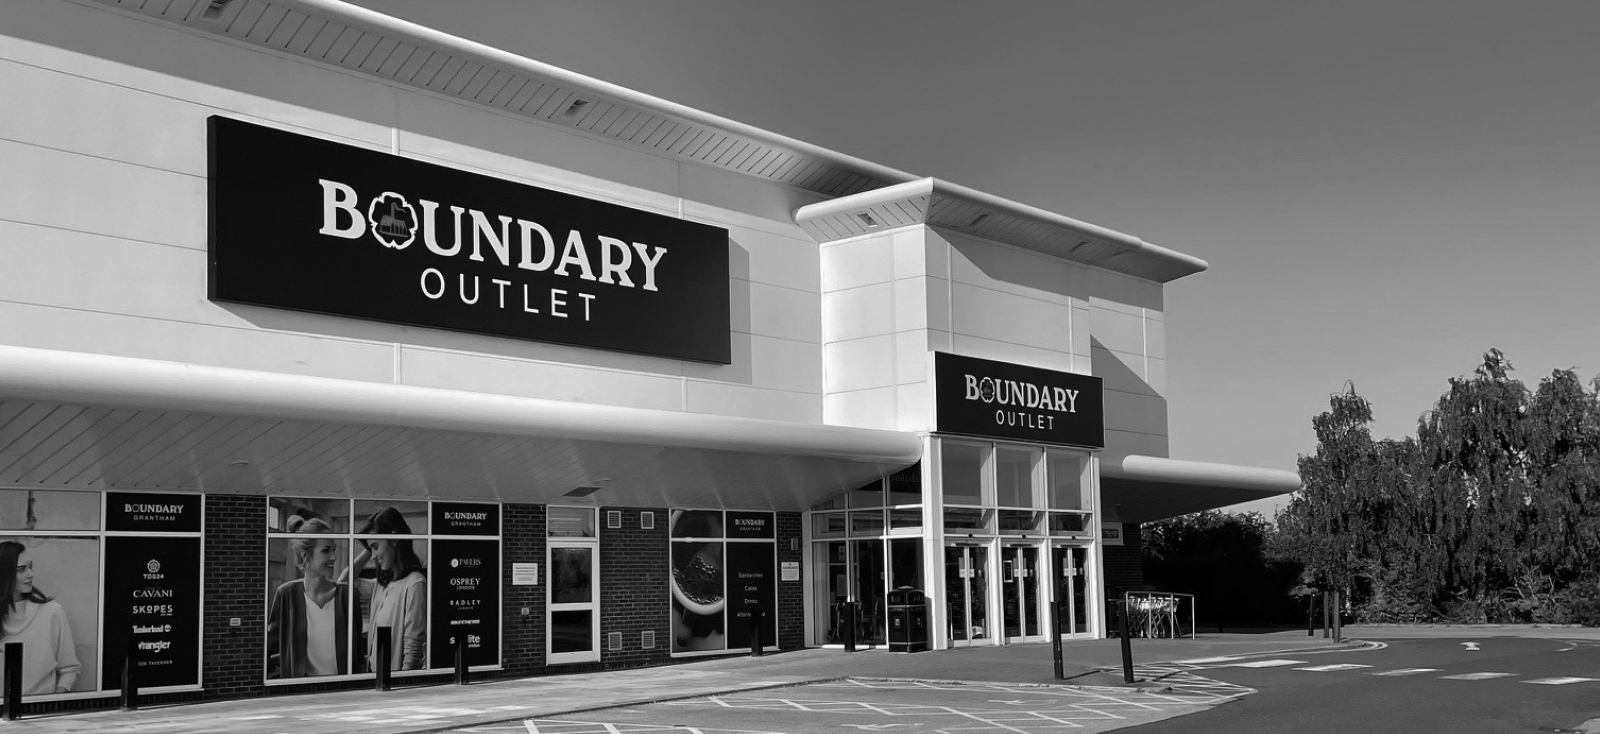 Boundary outlet store in Grantham, East Midlands